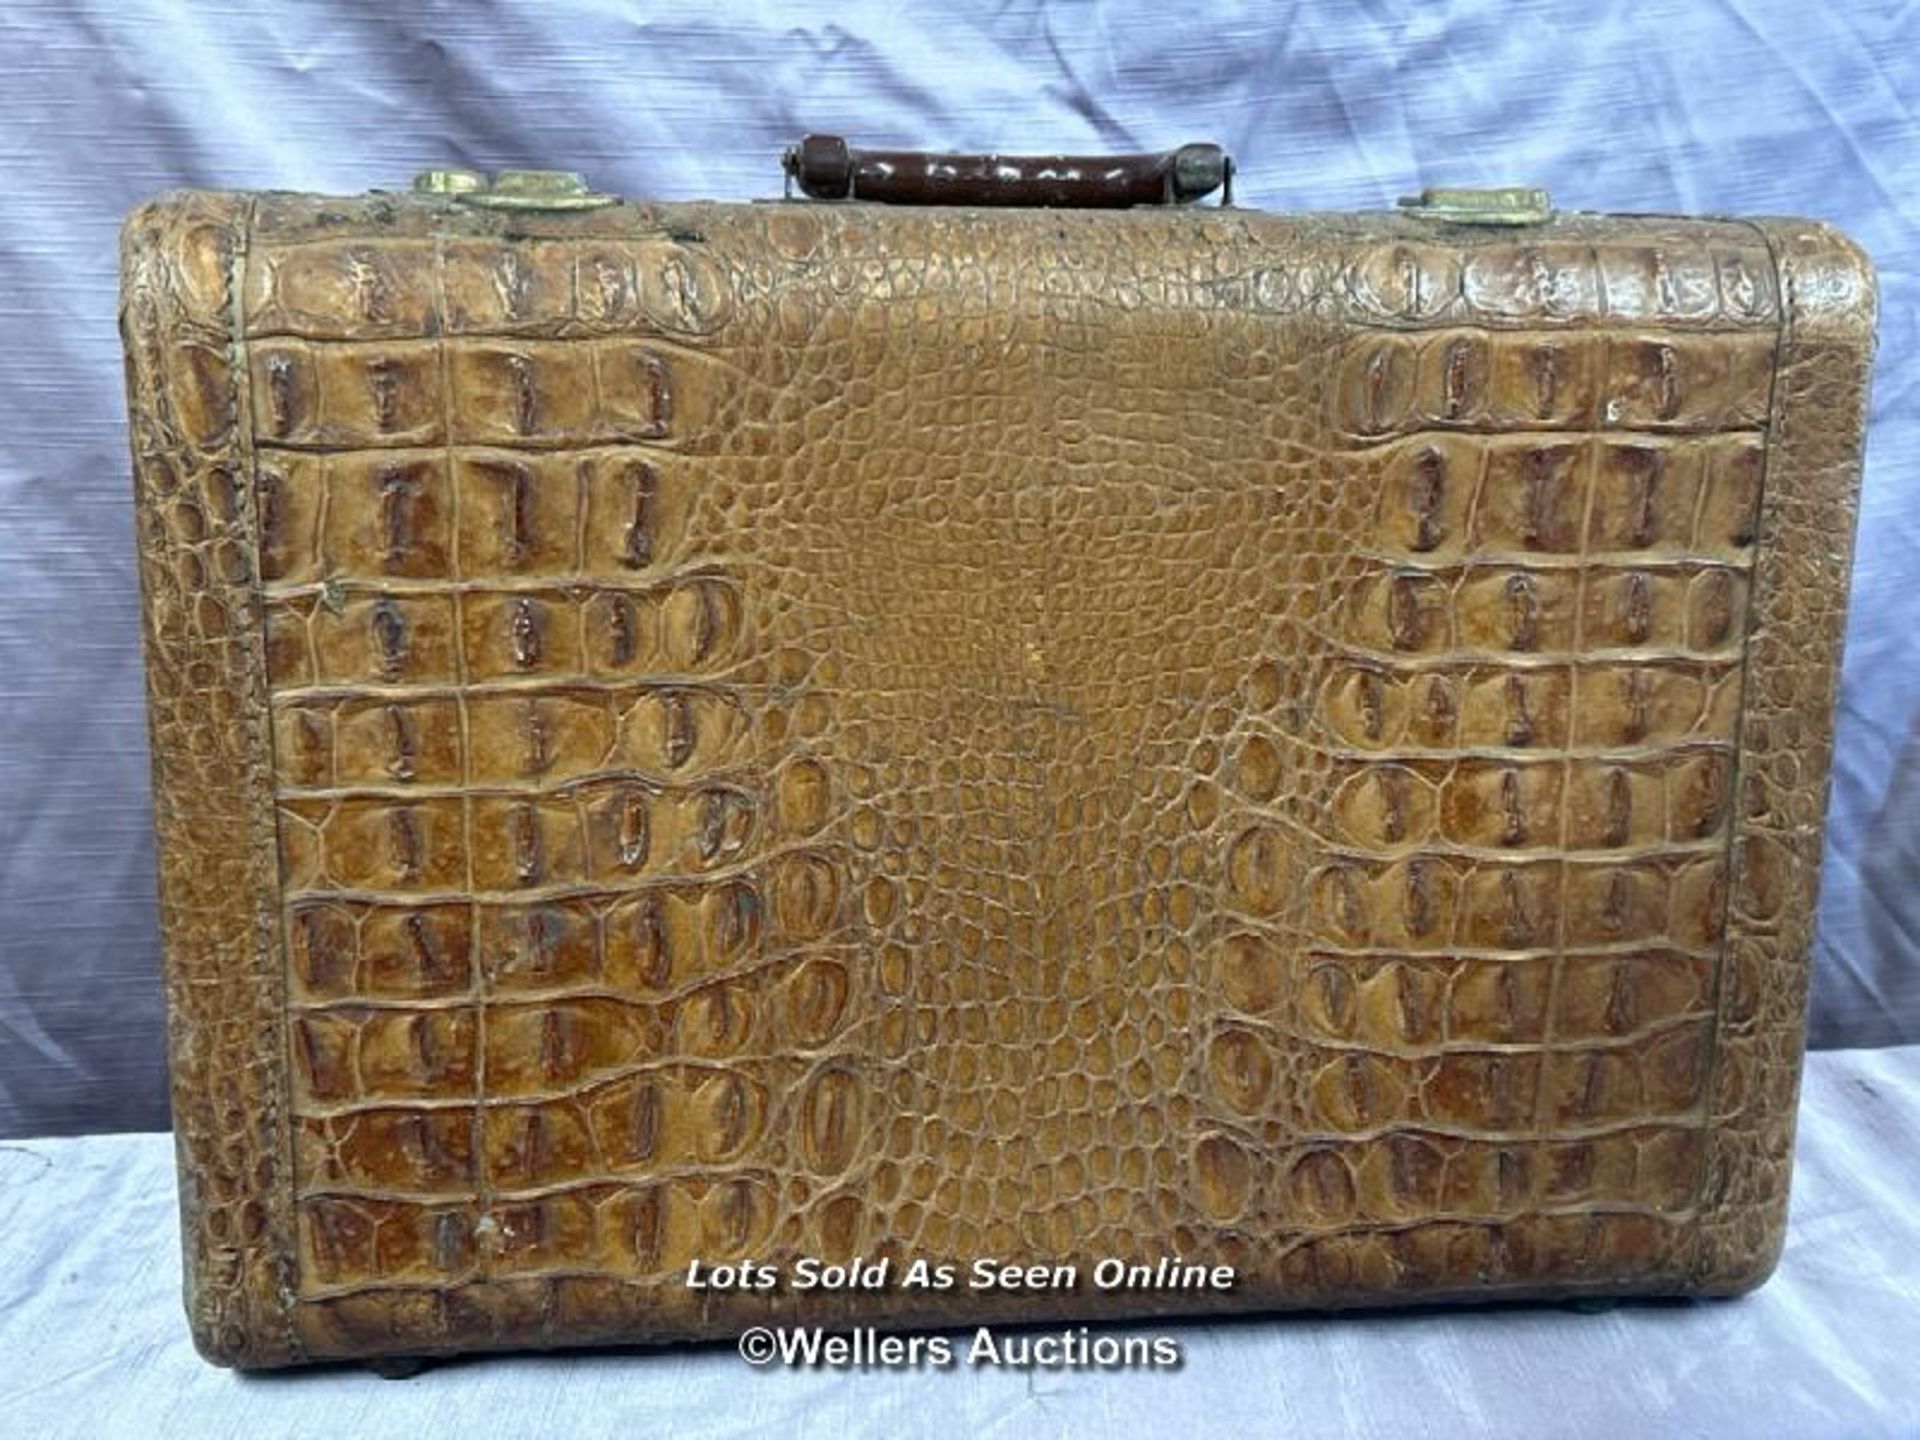 VINTAGE CROCODILE SKIN SUITCASE, MADE IN CANADA, 46 X 16 X 33CM - Image 2 of 4